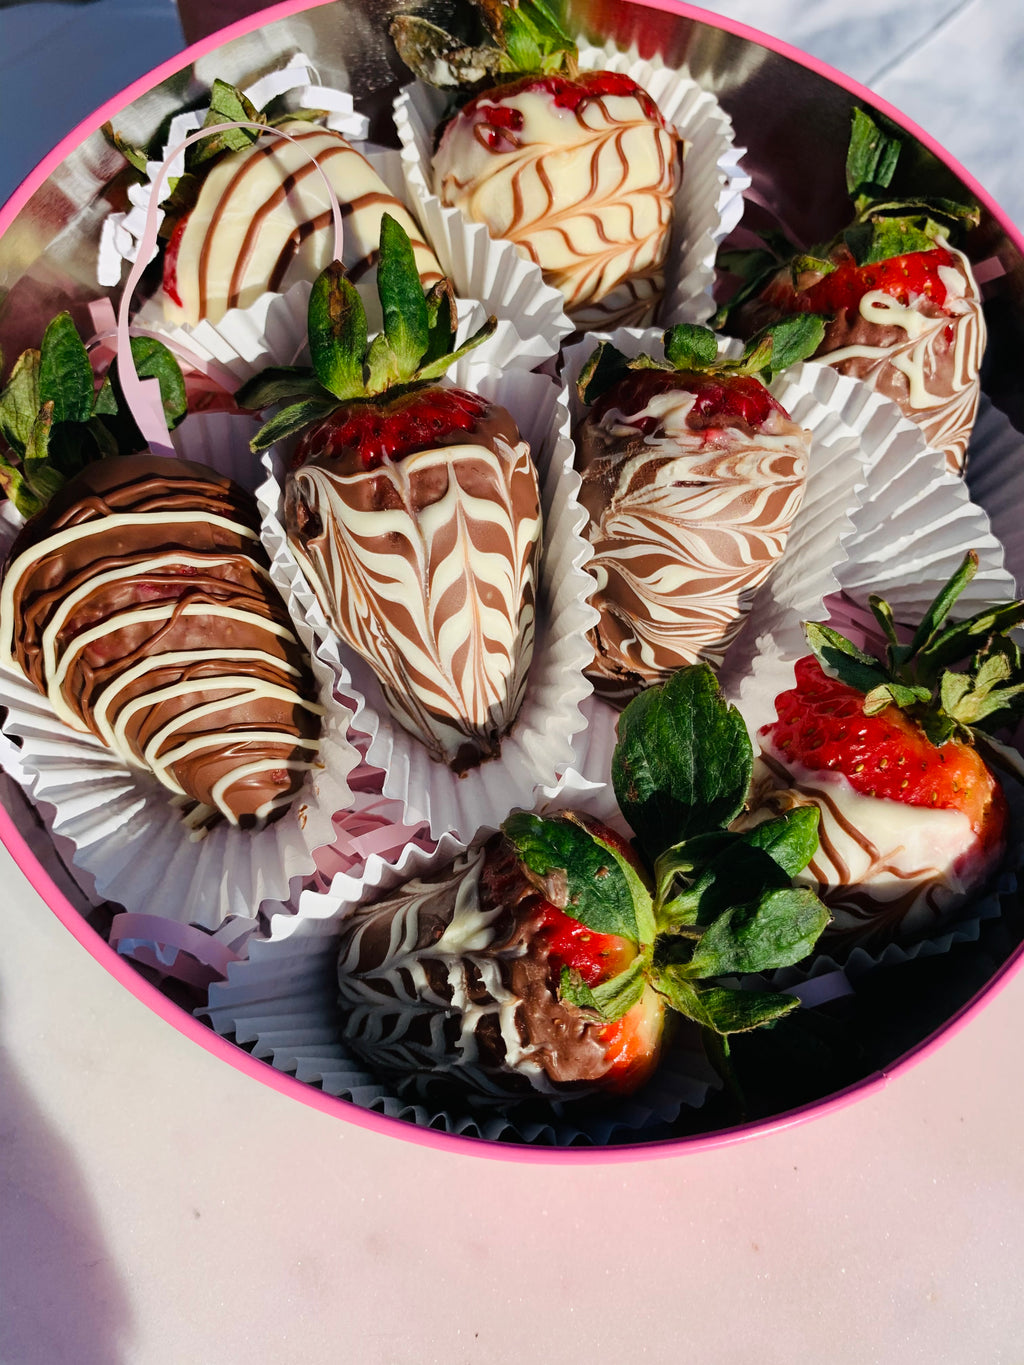 A Traditional Treat: Chocolate Covered Strawberries - Tasty Treats